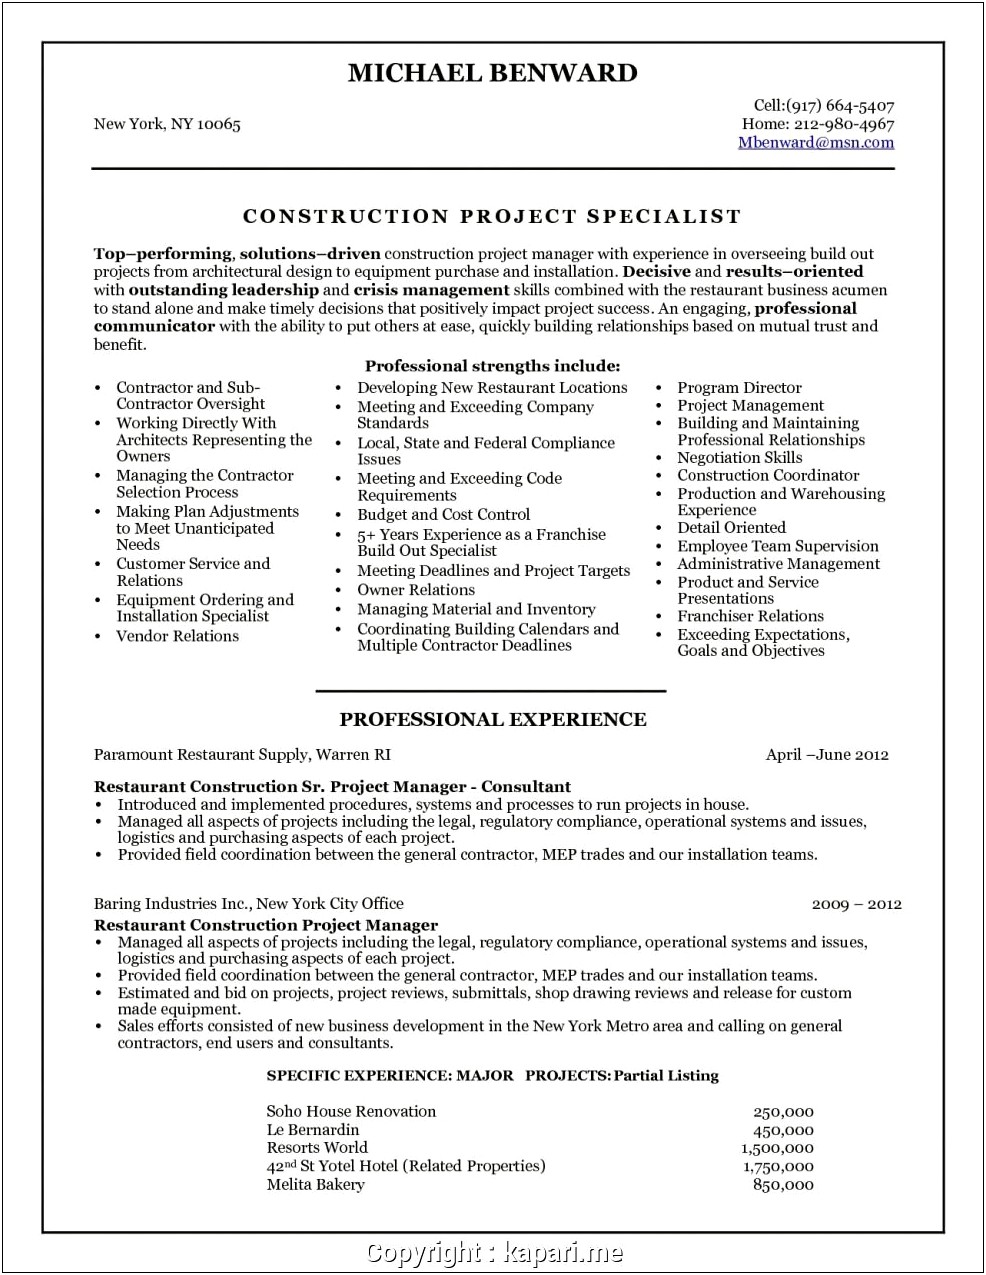 Resume Sample For Construction Sales